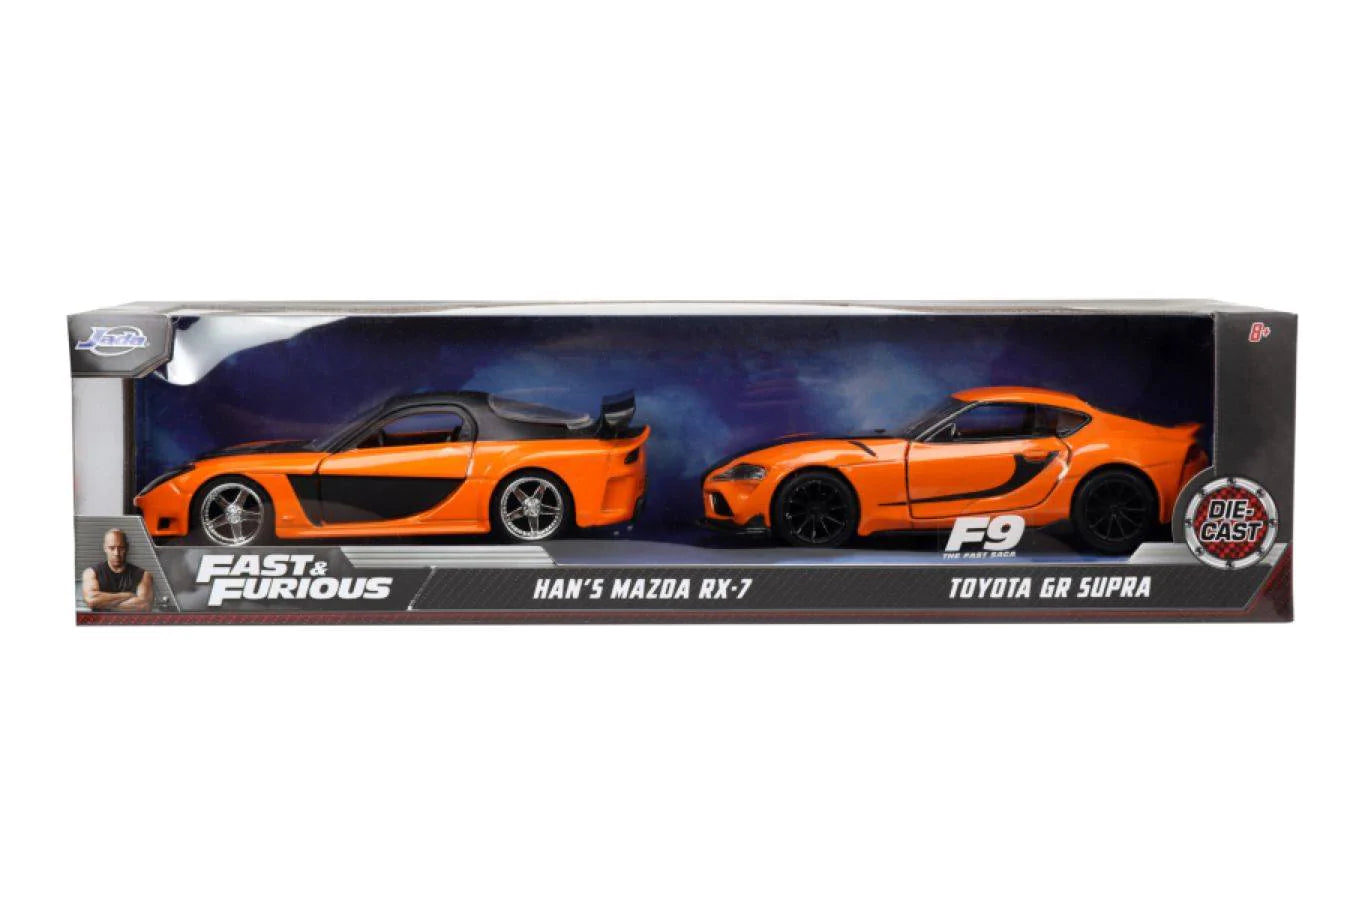 Fast & Furious - Han's Mazda RX-7 & Toyota GR 1:32 Scale 2-Pack